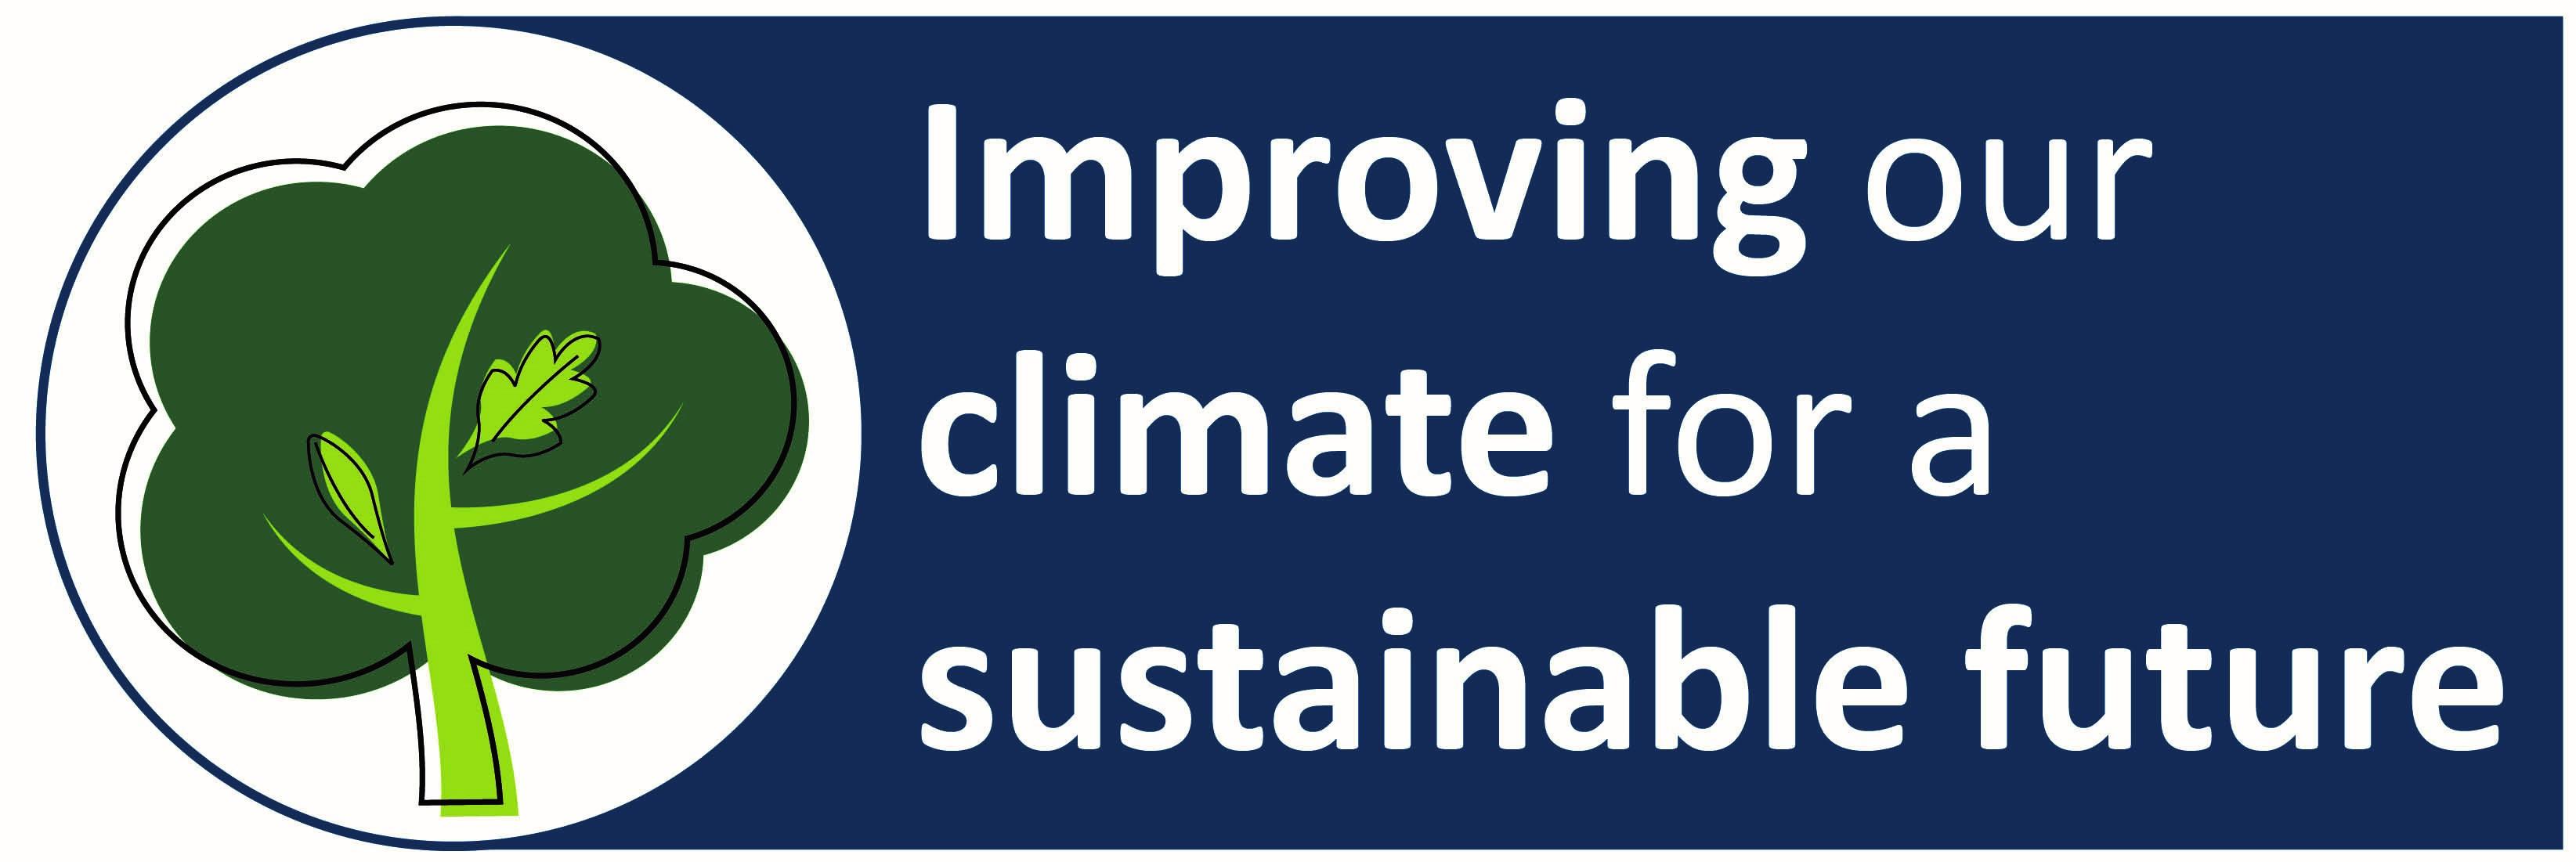 Improving our climate for a sustainable future